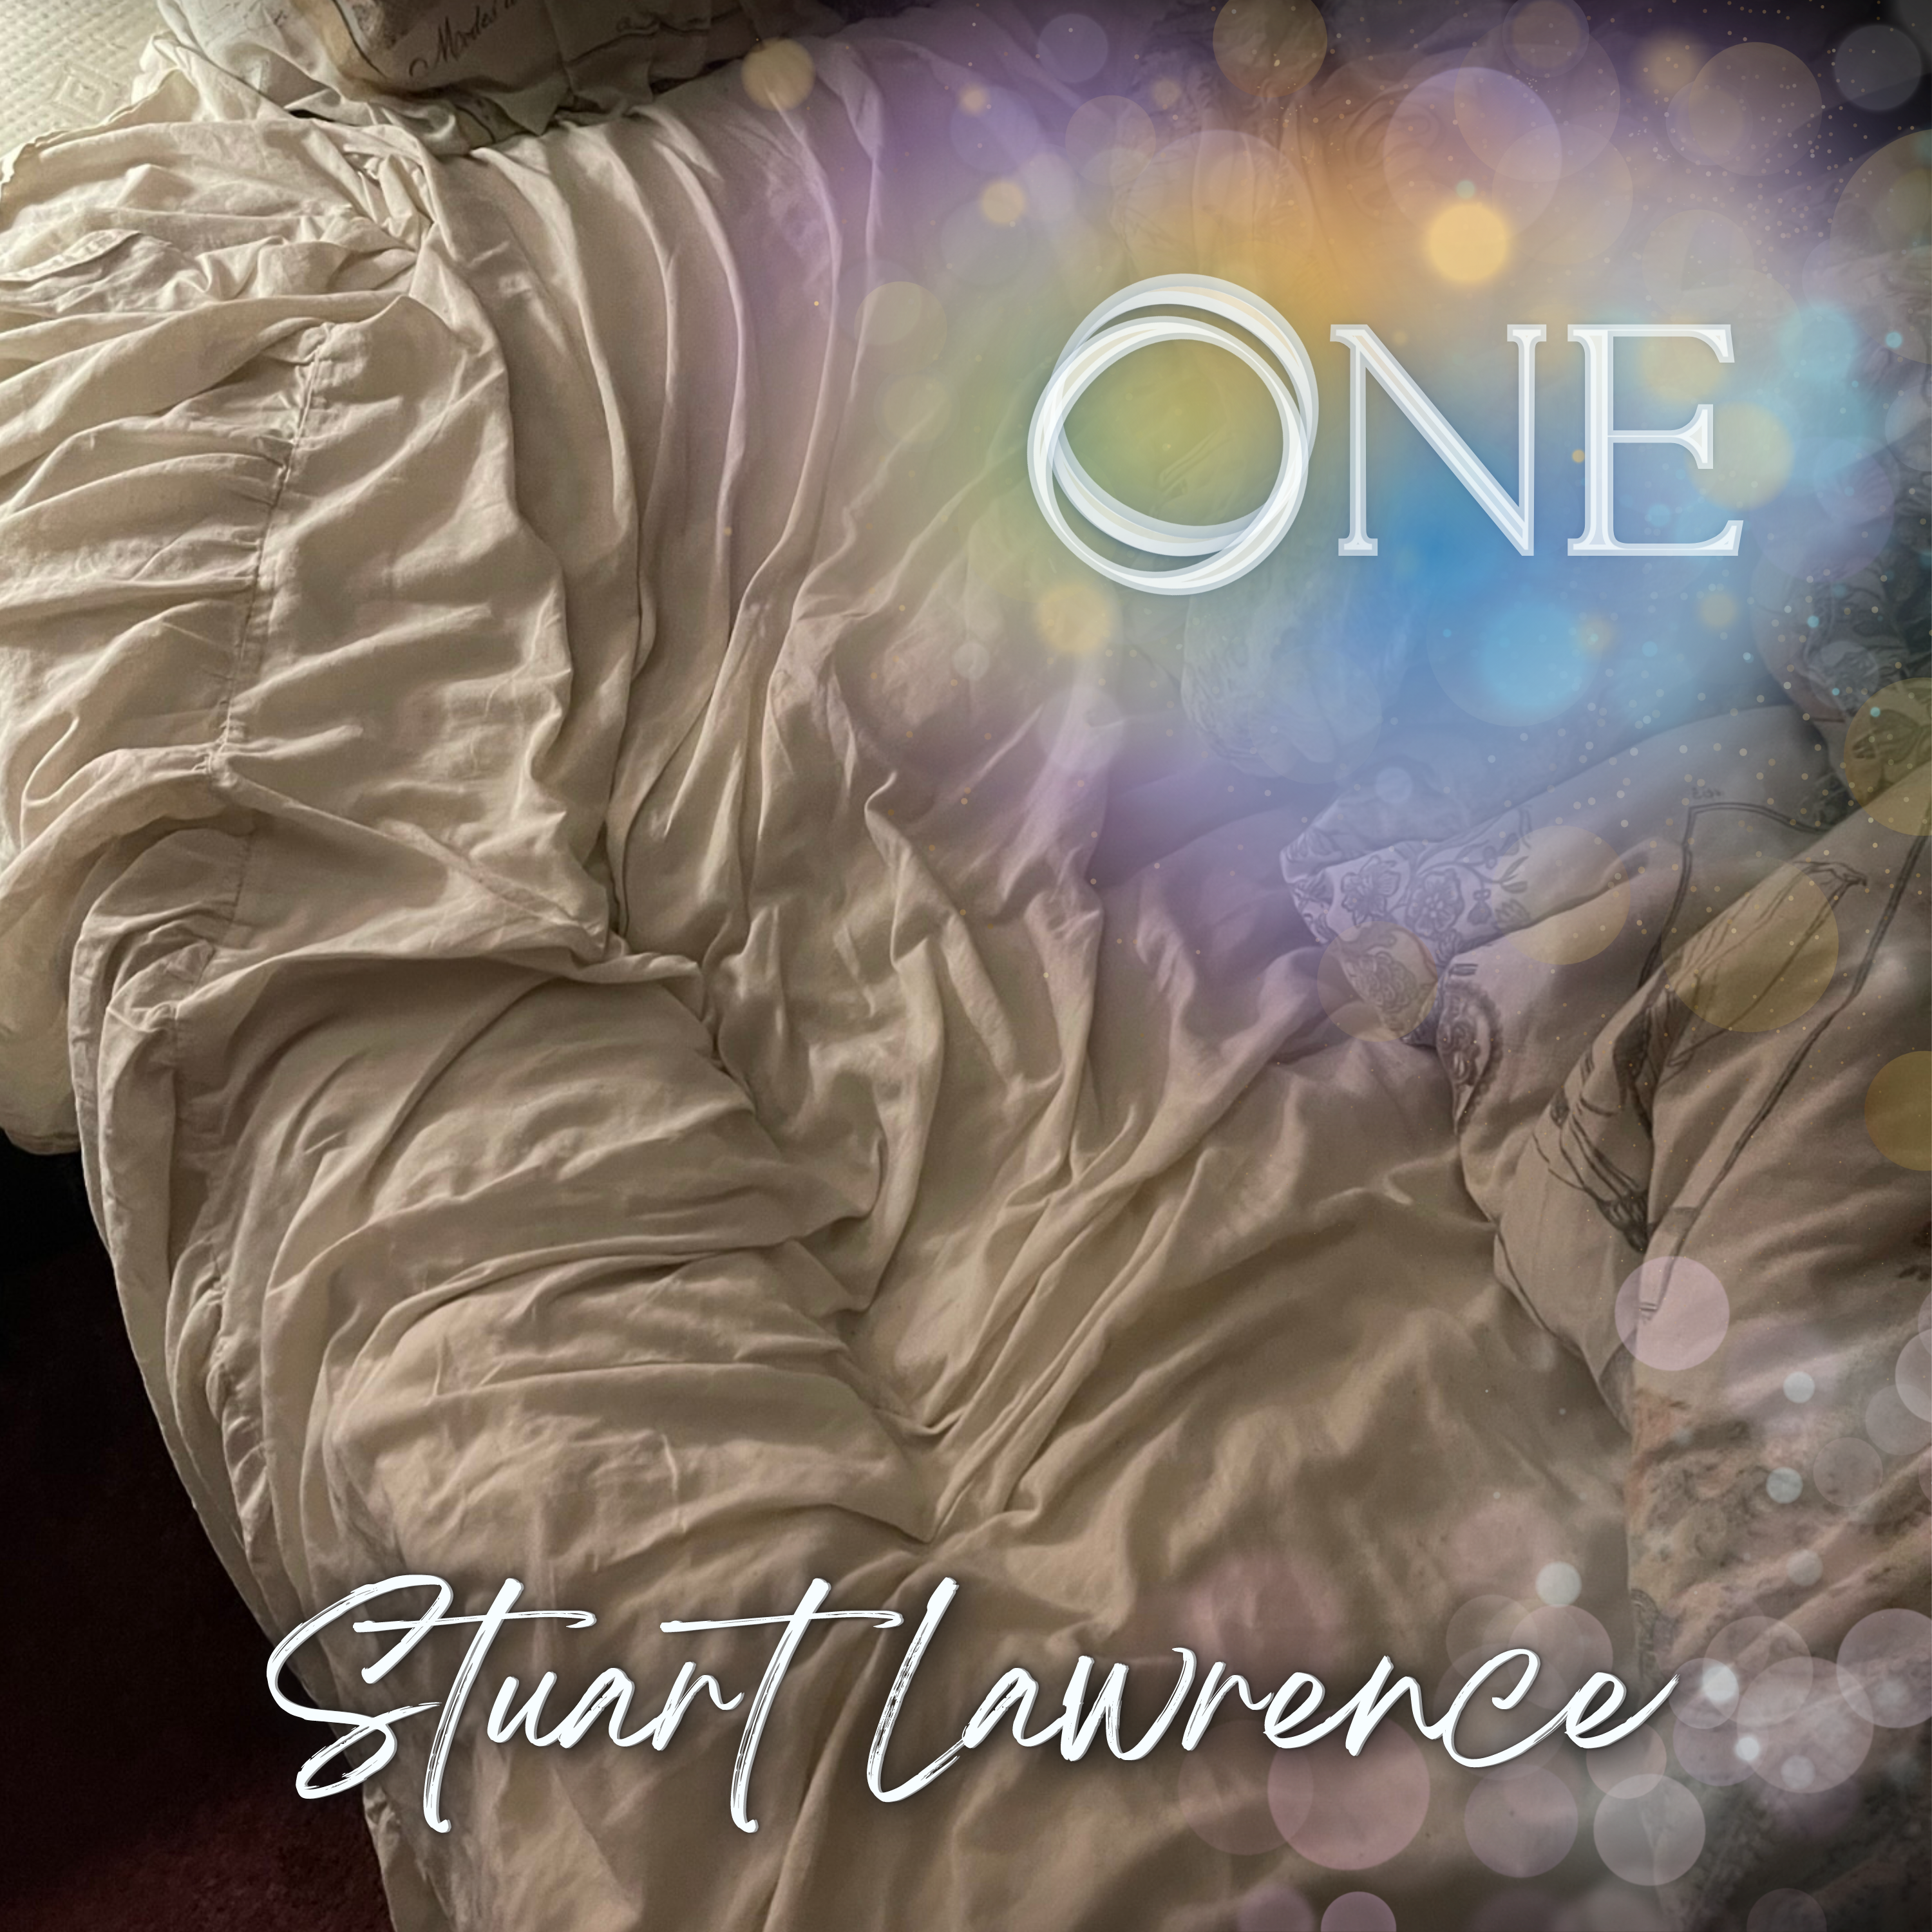 Stuart Lawrence’s Debut Album “ONE”: An Adventure in Indie Silk Soundscapes